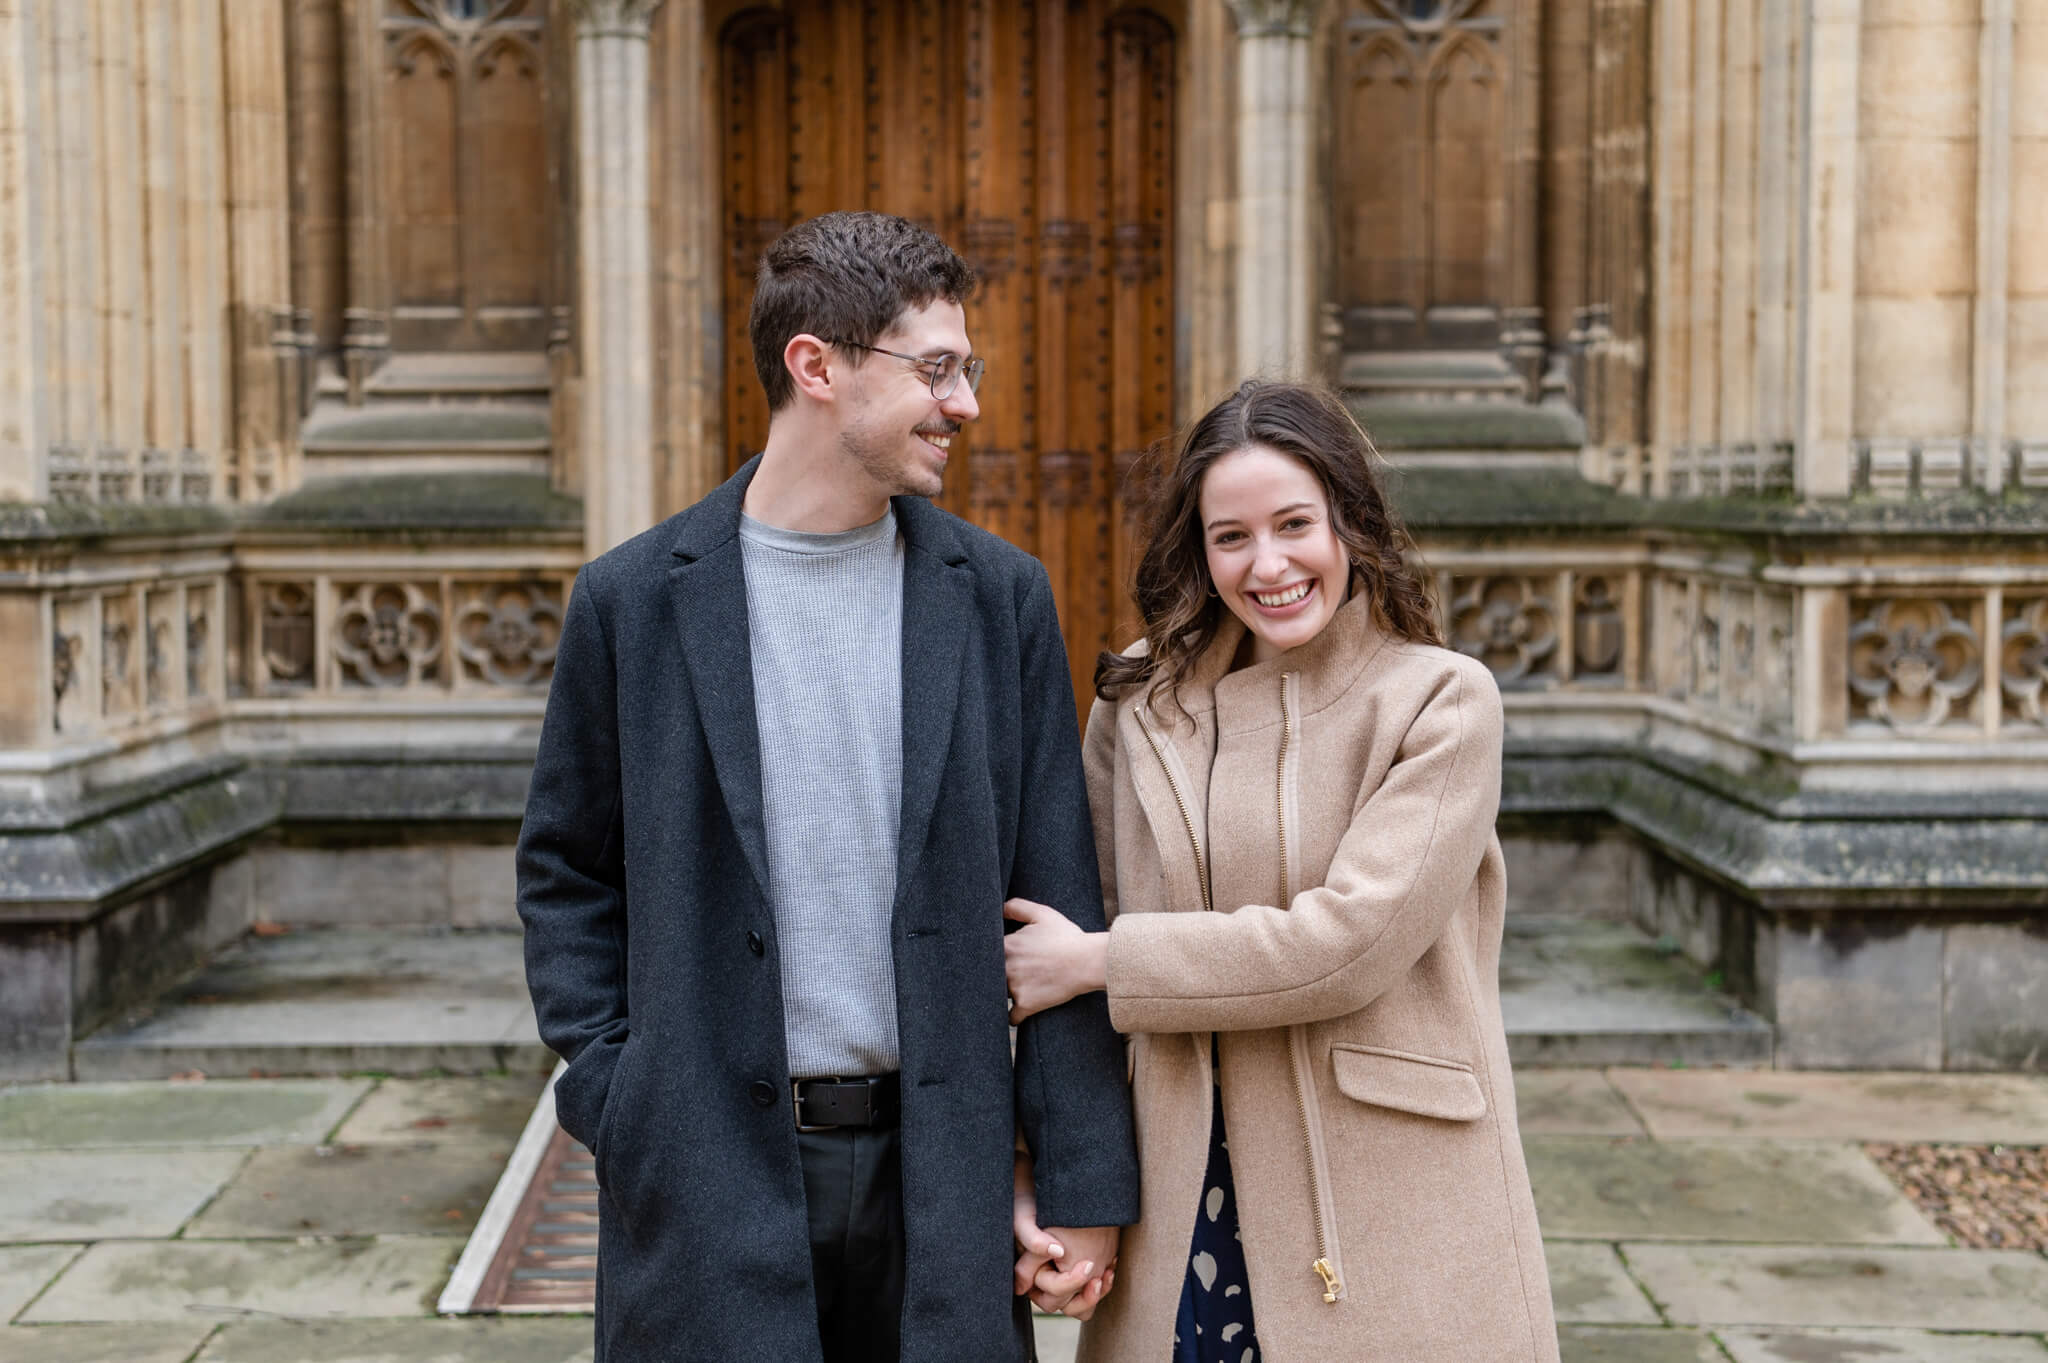 Oxford Engagement Session - Oxford Wedding Photographer - Couple photos at the Bodleian Libraries